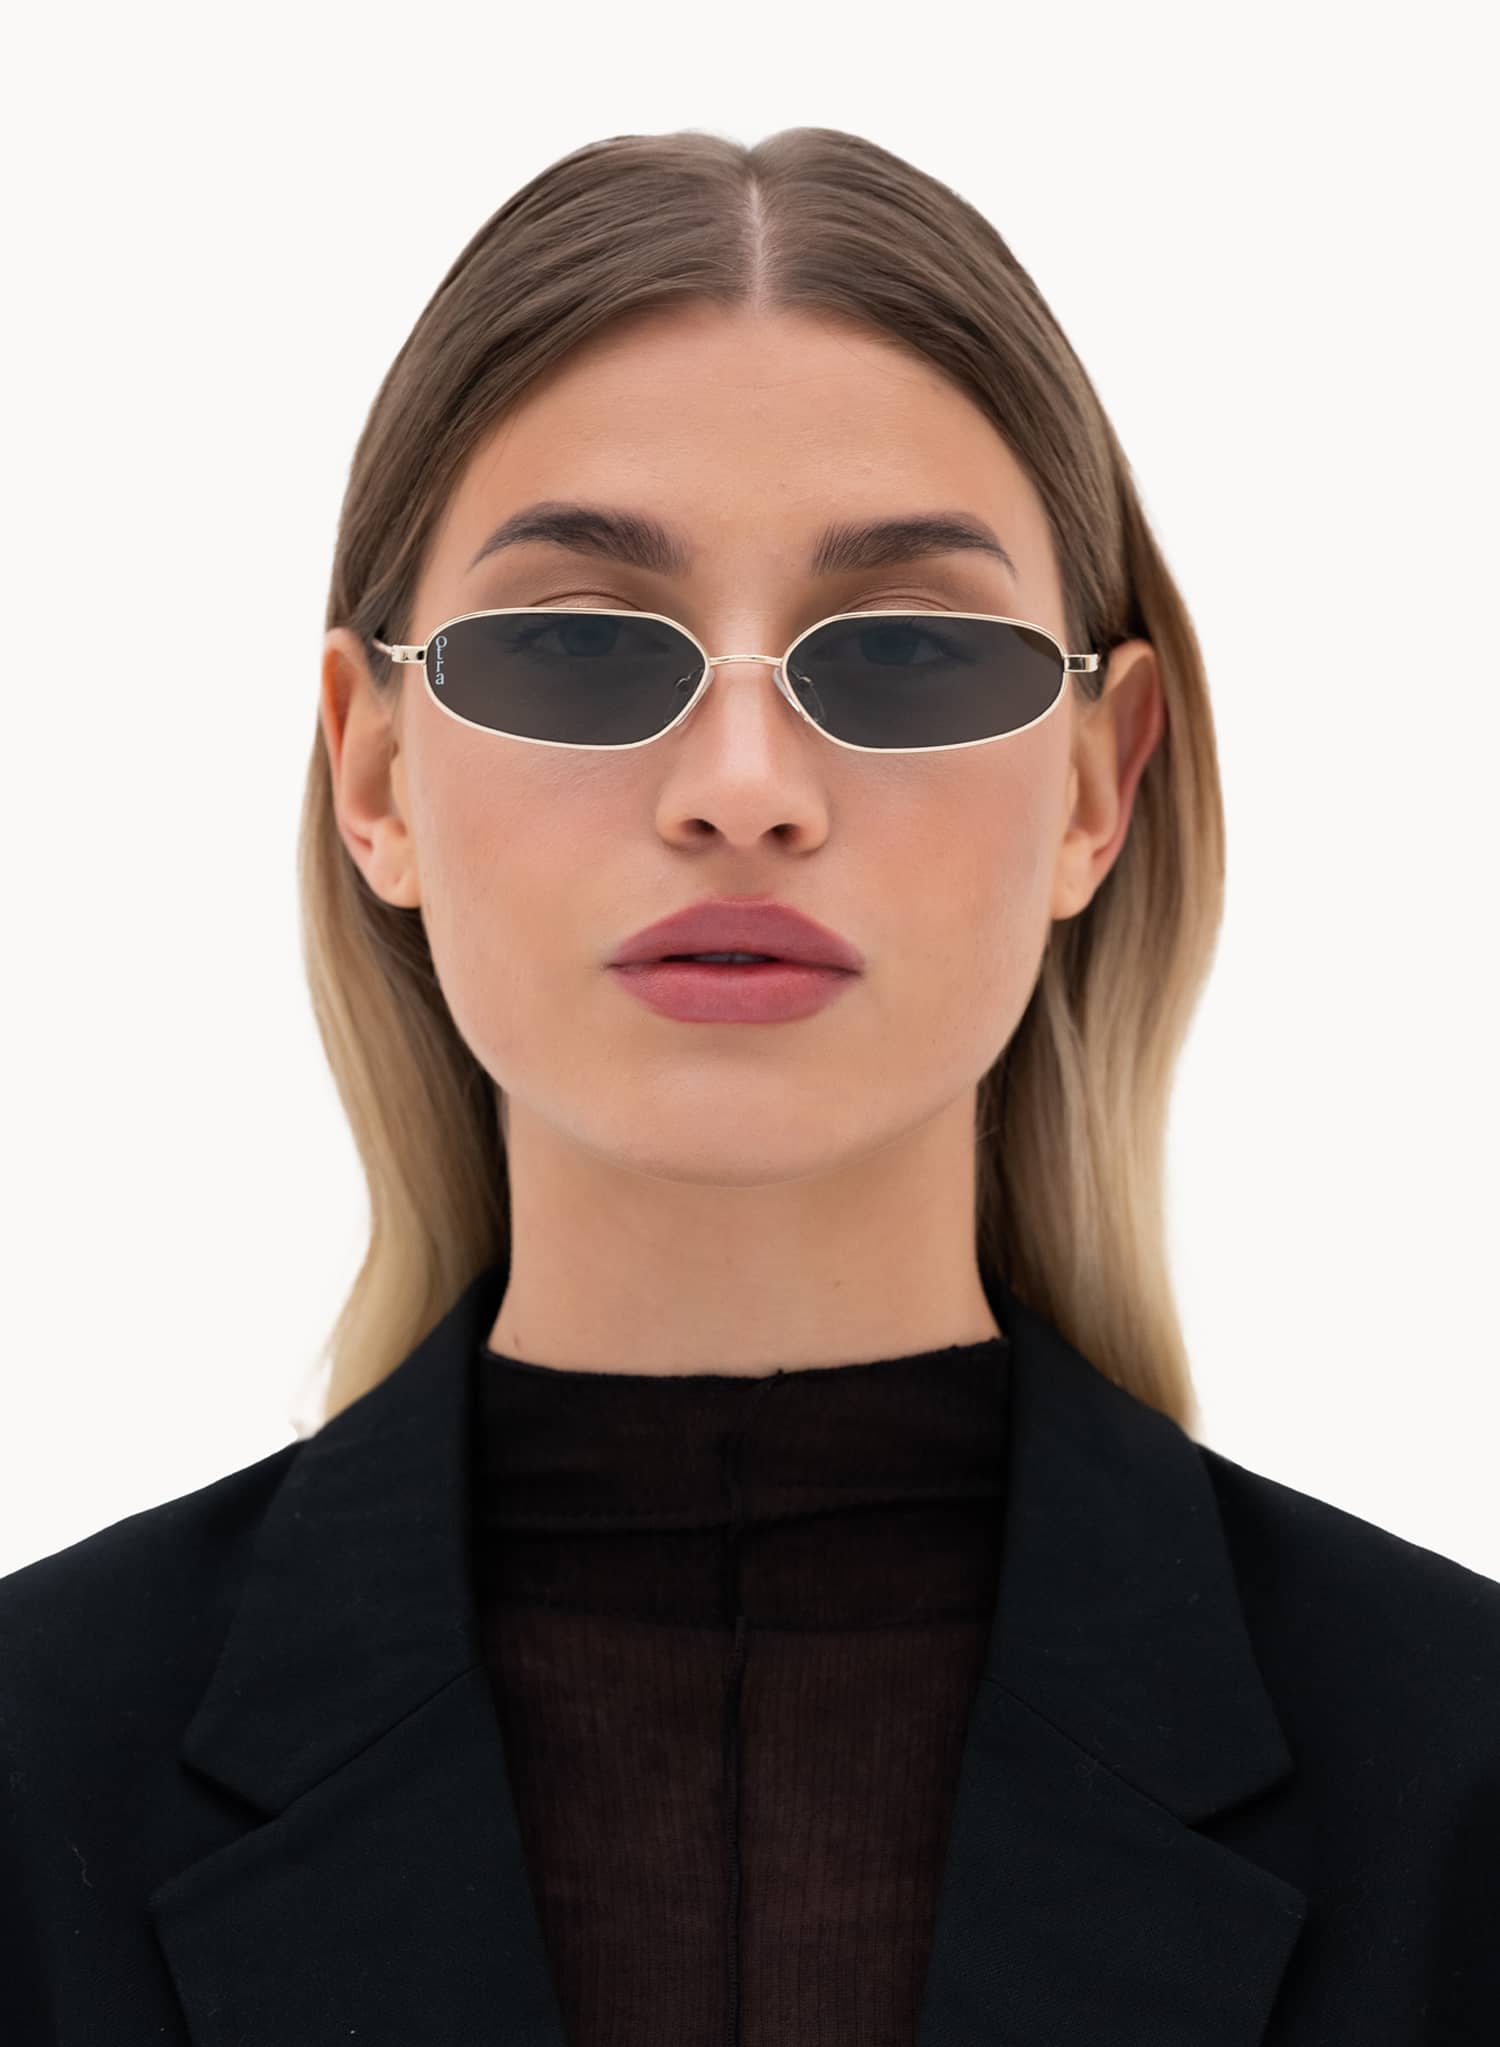 Model wearing Drew metal sunglasses with gold metal frame and green lenses